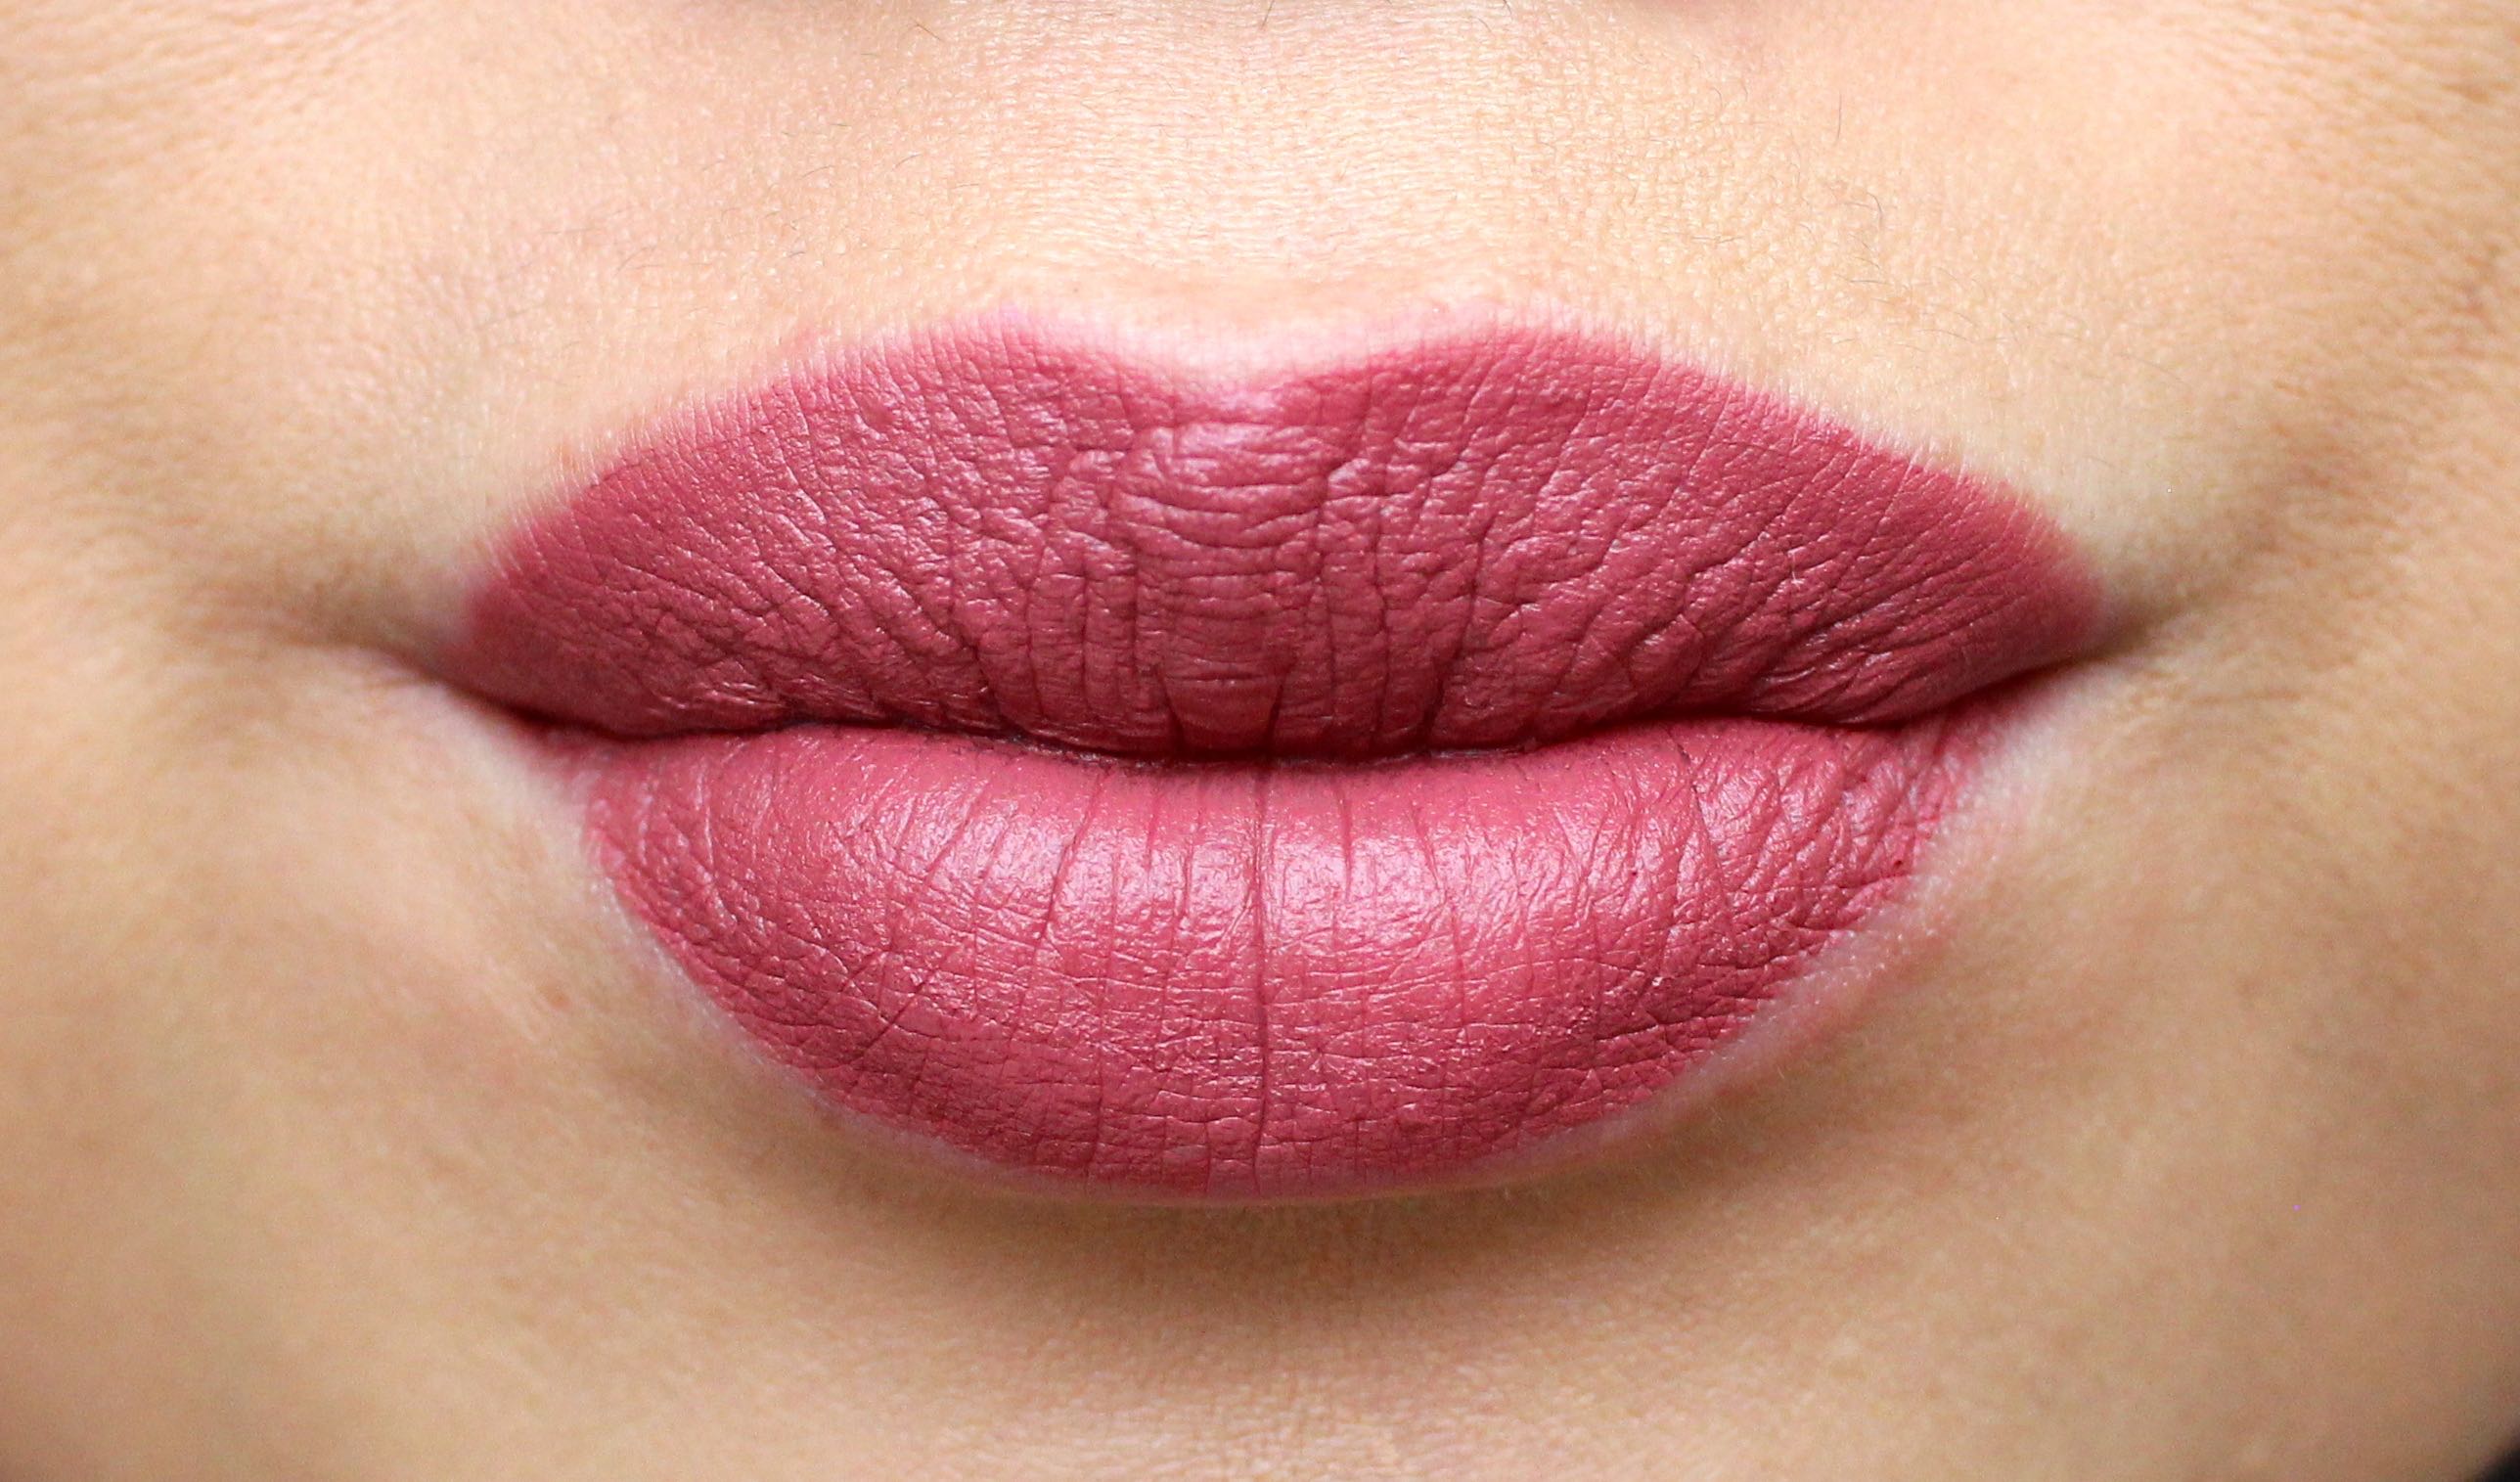 Maybelline Colour Sensational Creamy Matte Lipstick in Touch of Spice review by facemadeup.com